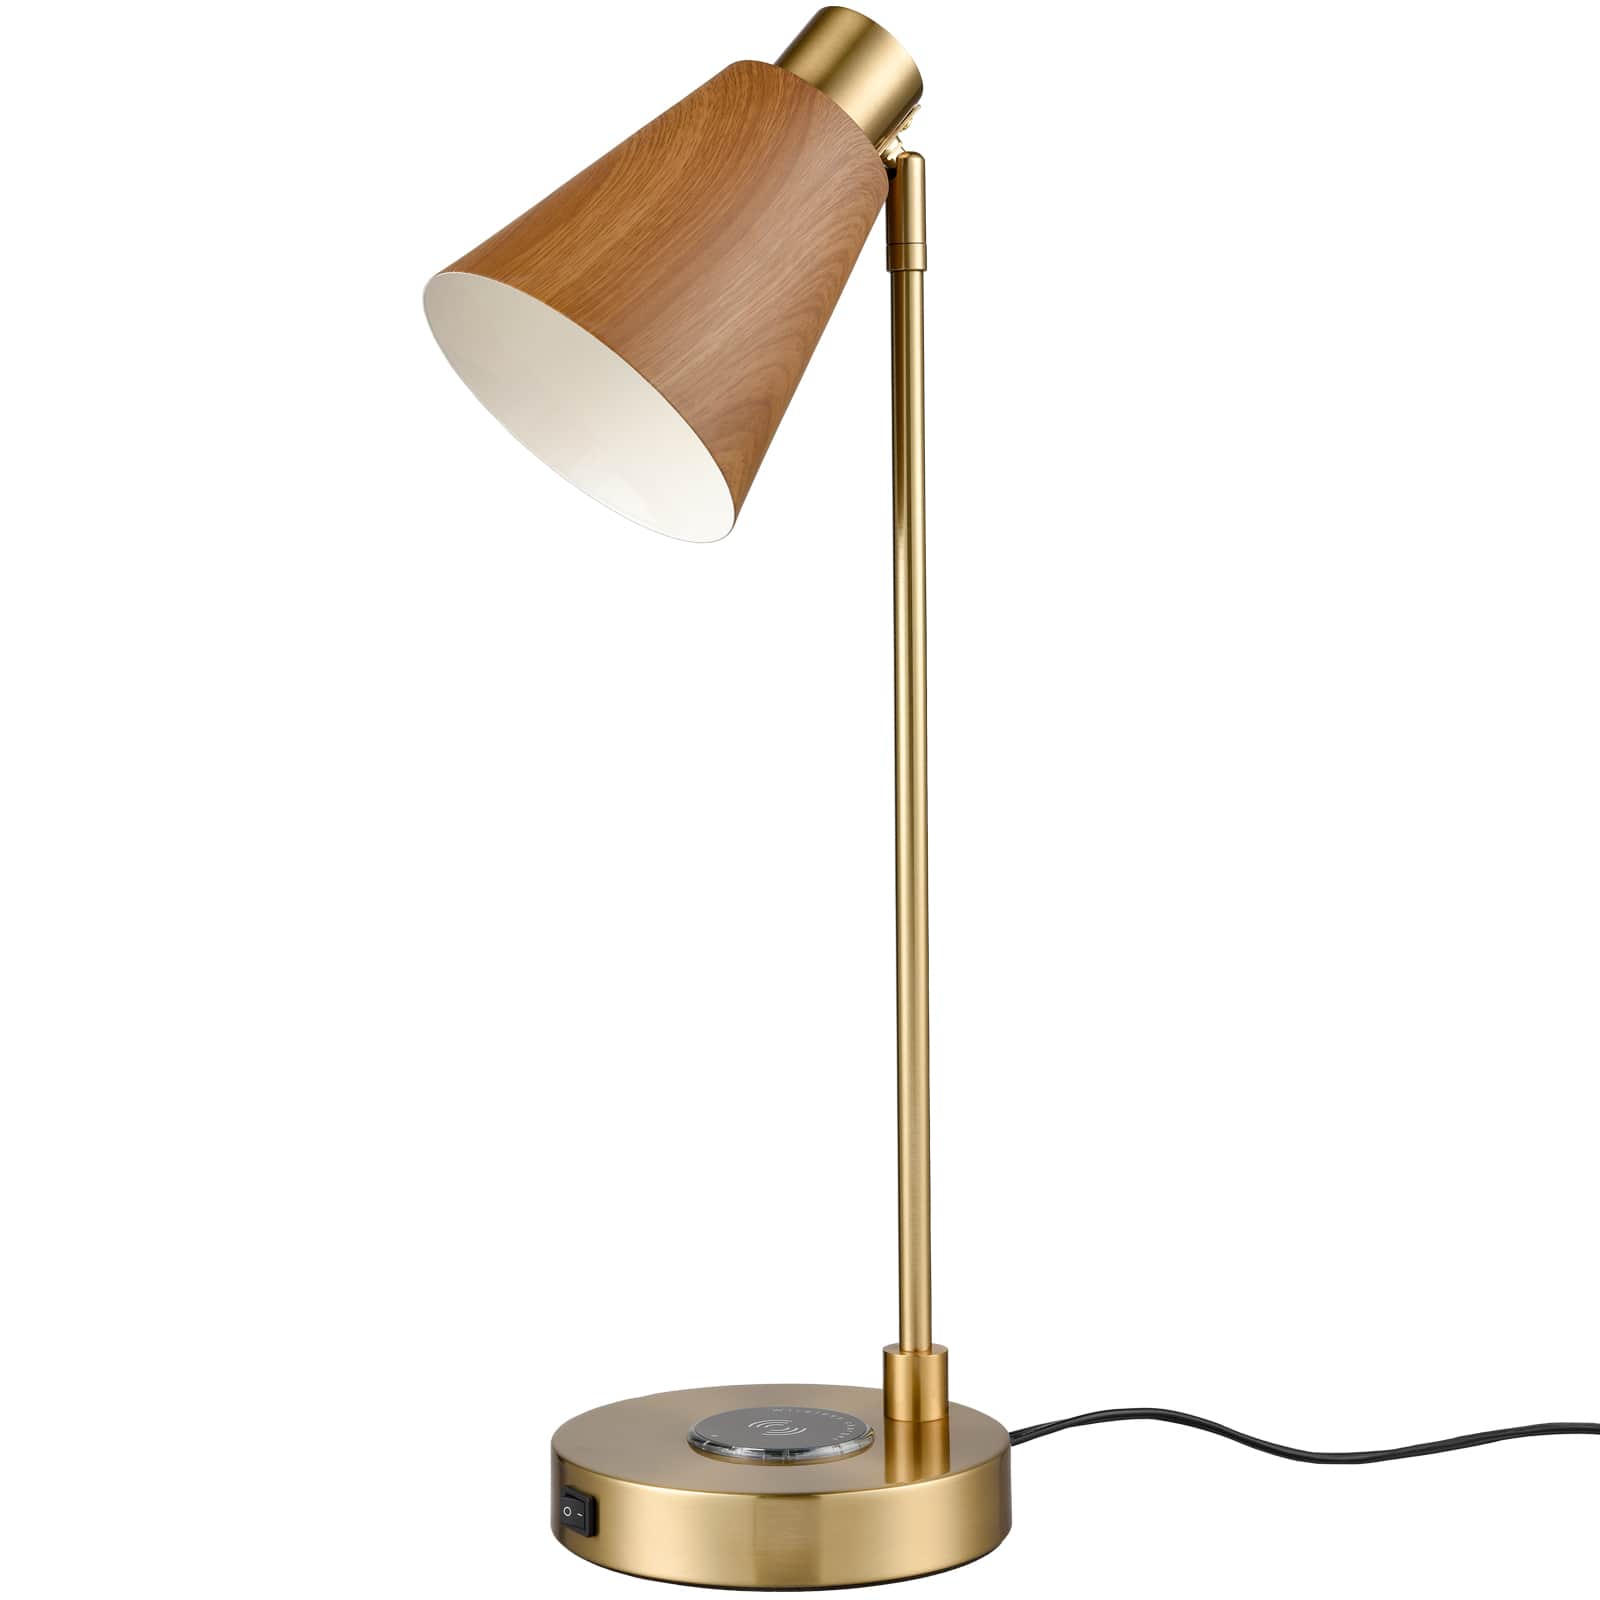 Modern Table Lamp with Wireless Charger and USB Charging Port